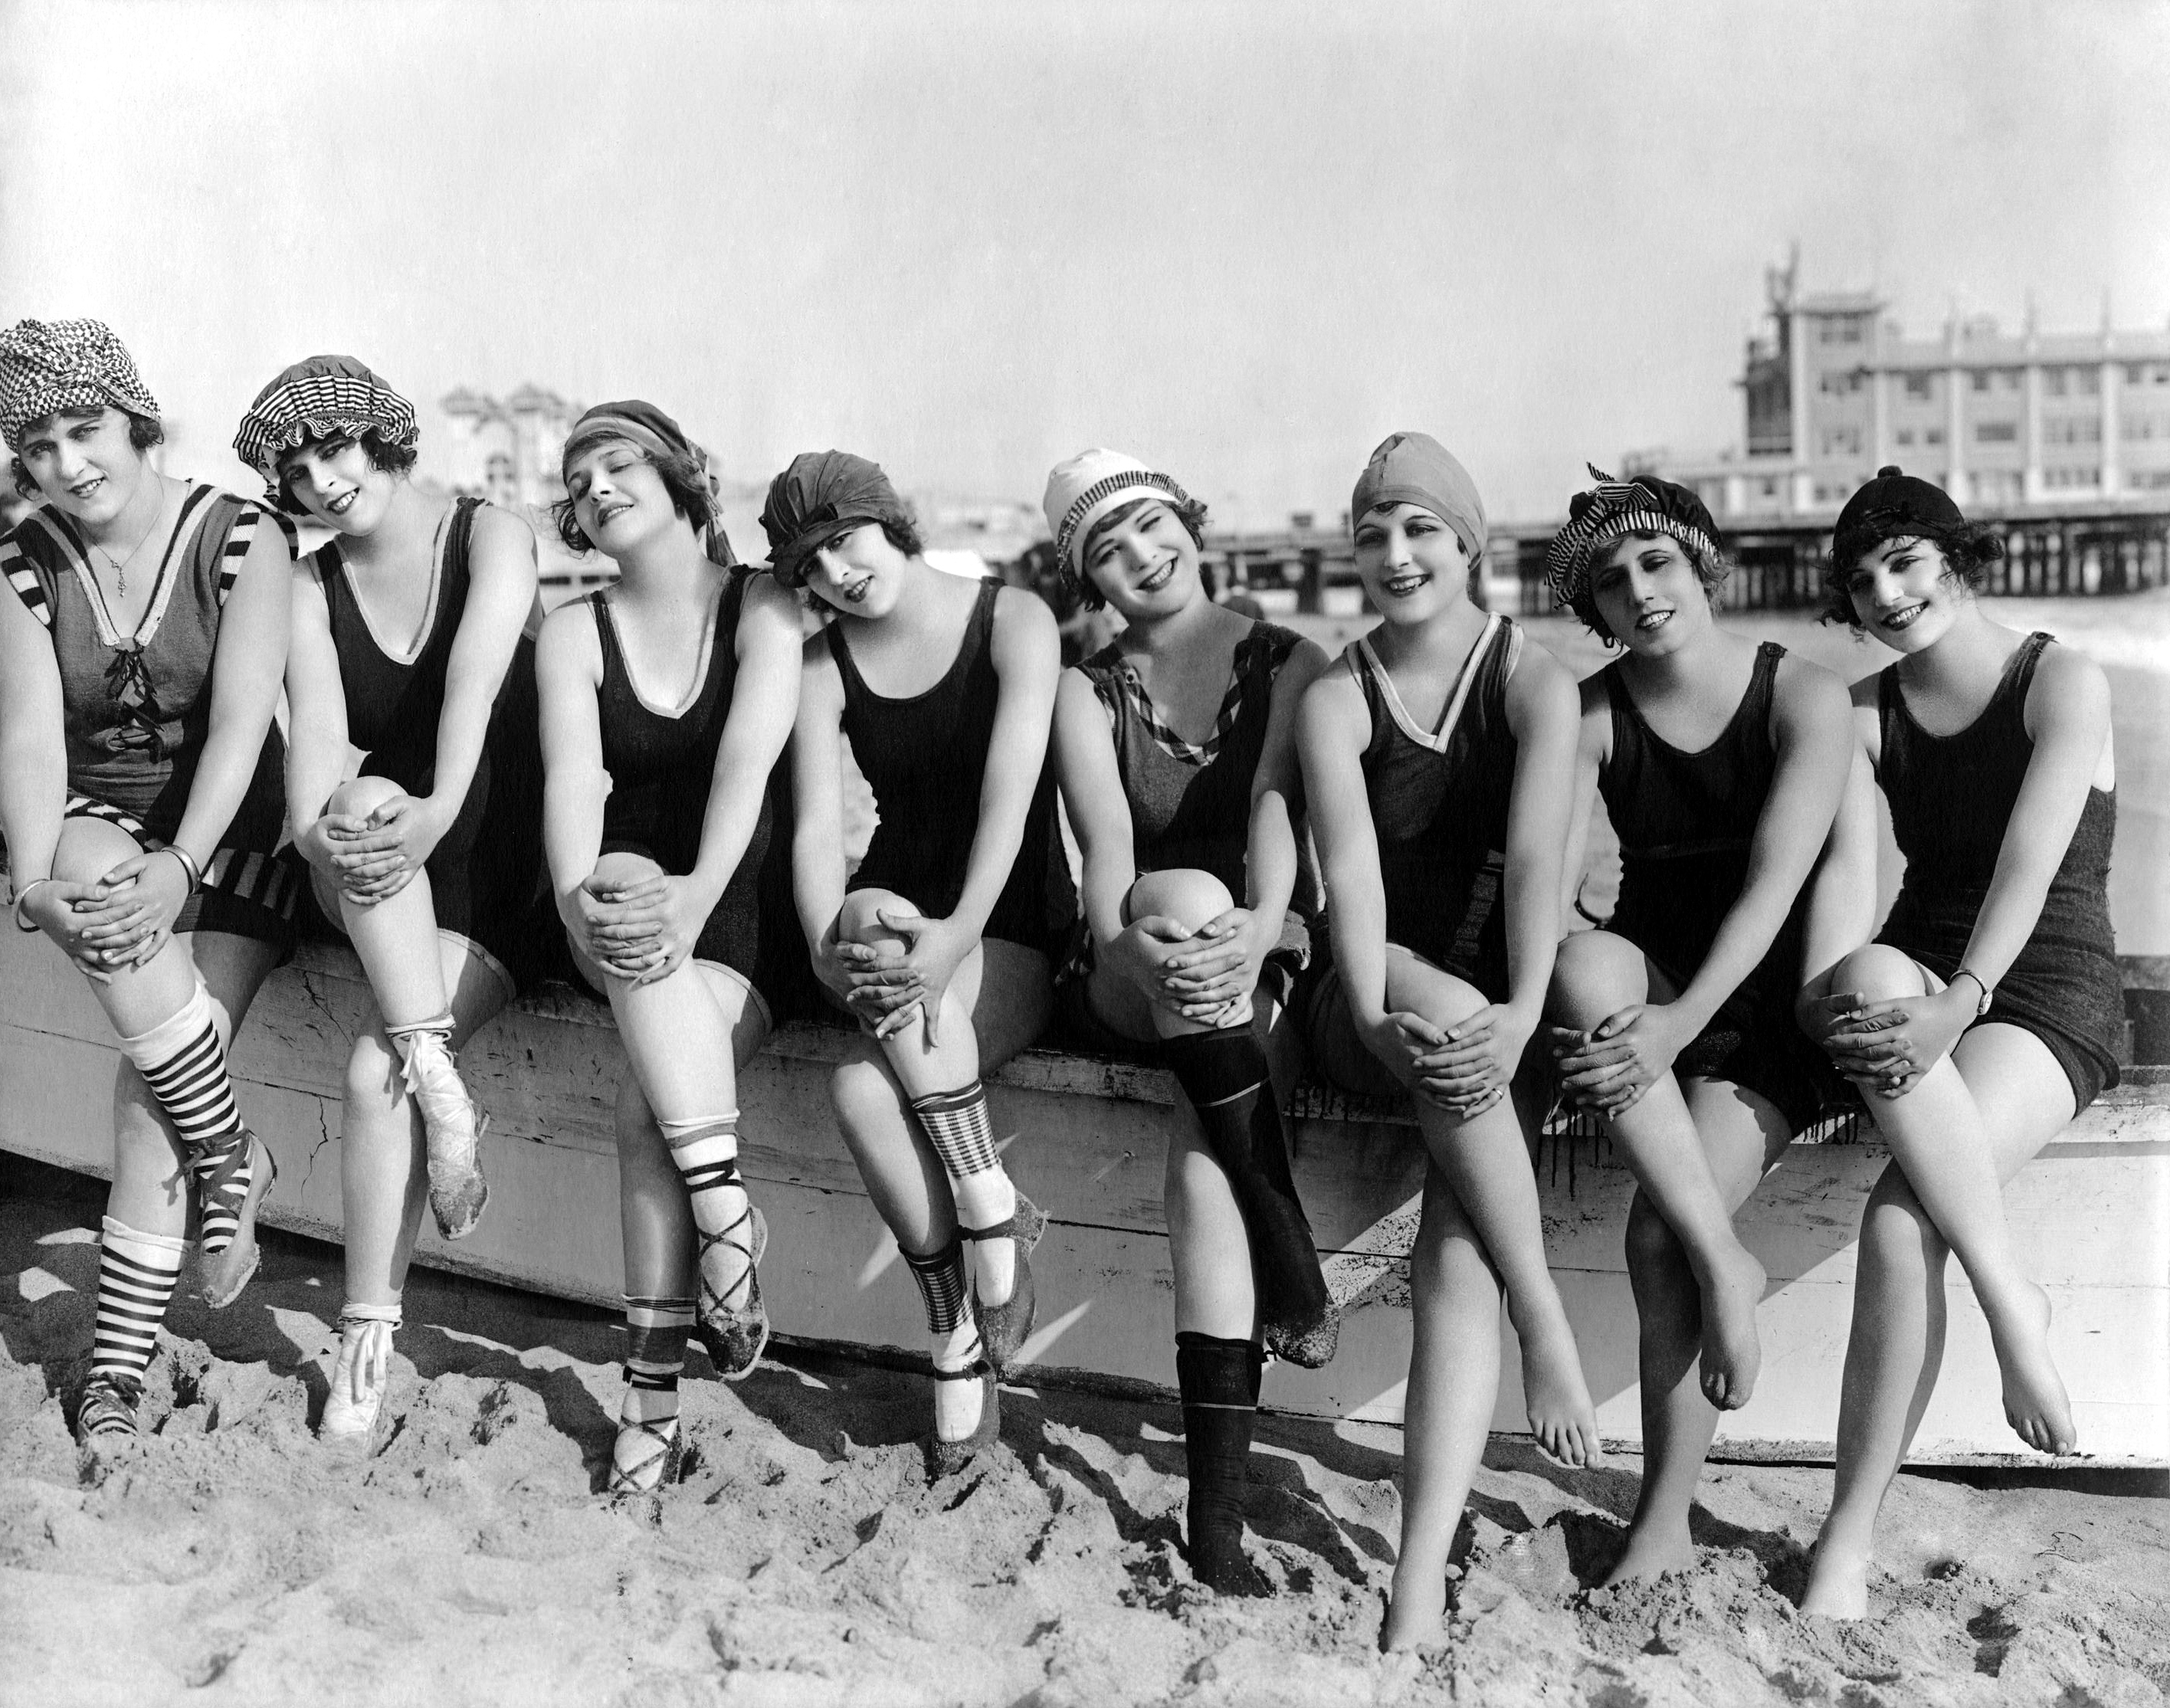 Models pose as part of Mack Sennett Bathing Beauties collection in Atlantic City, US in 1917.